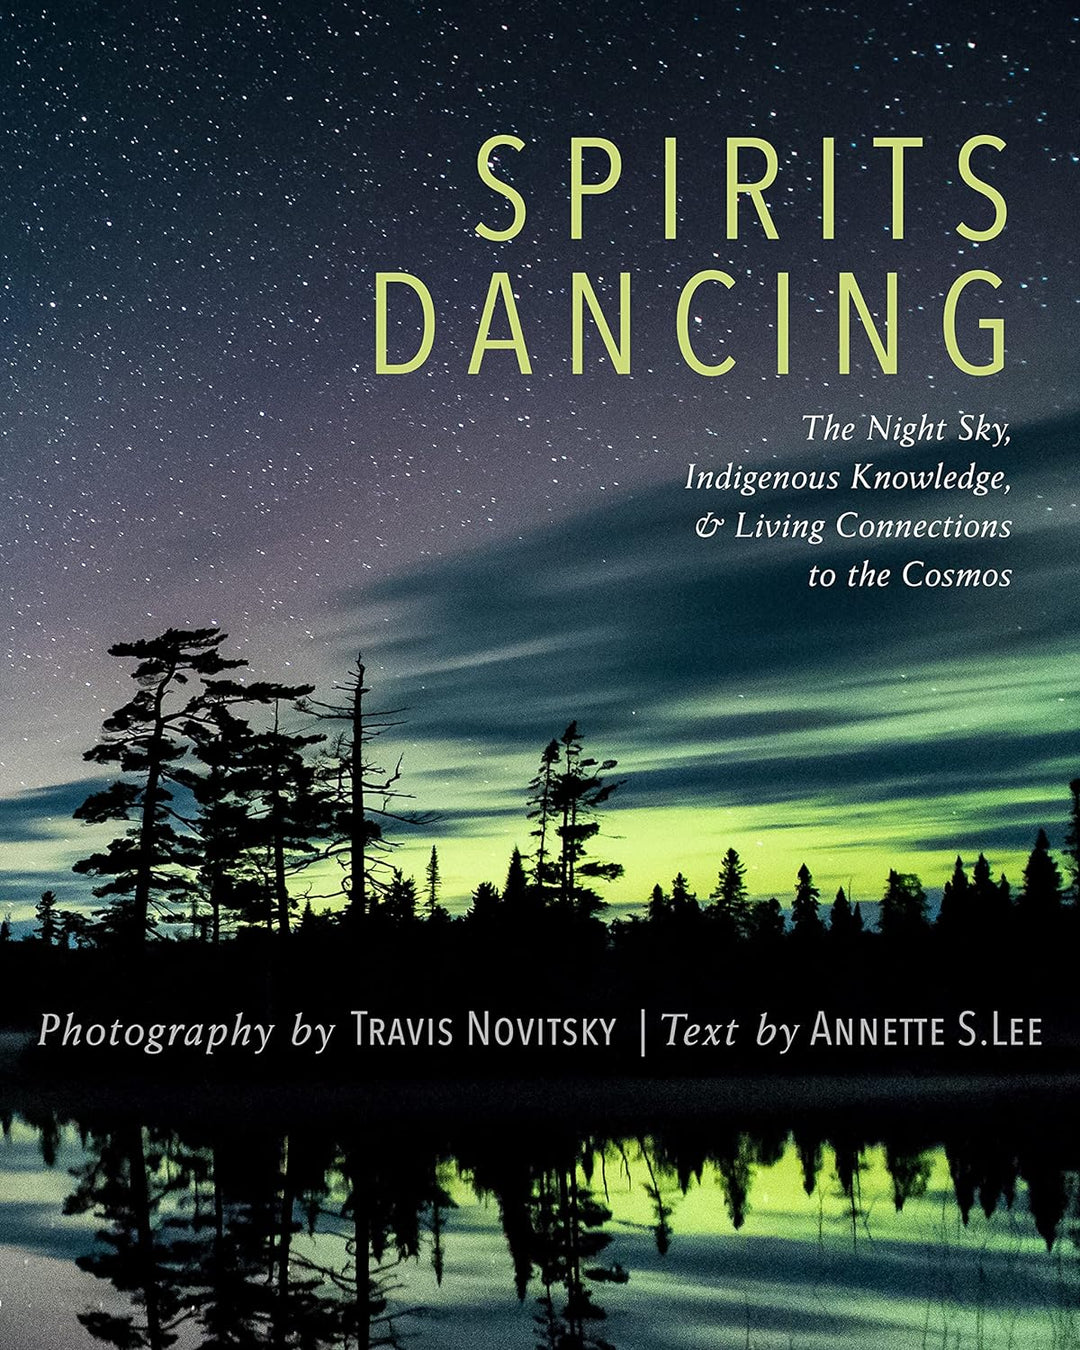 Spirits Dancing: The Night Sky, Indigenous Knowledge, & Living Connections to the Cosmos by Annette S. Lee & Travis Novitsky